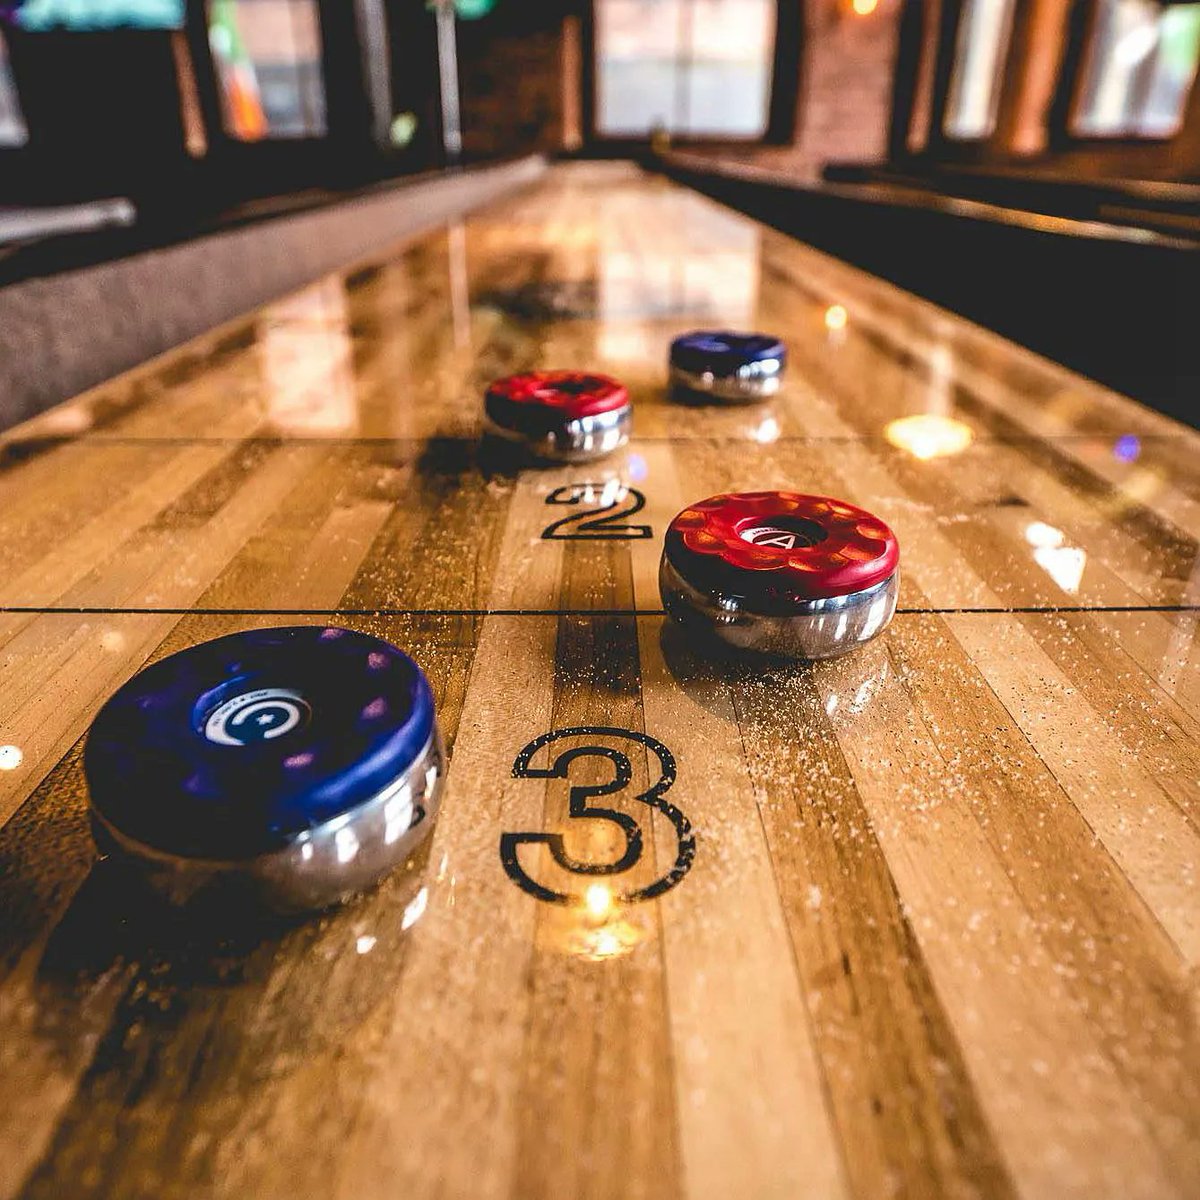 Who fancies a few pints and a game of Shufl? 🍺 If you haven't tried a match with your mates on our @playshufl shuffleboards at our Middlewood Locks Beerhouse, you're missing out on a load of fun! We're open now - come down and unleash your competitive side 🏆